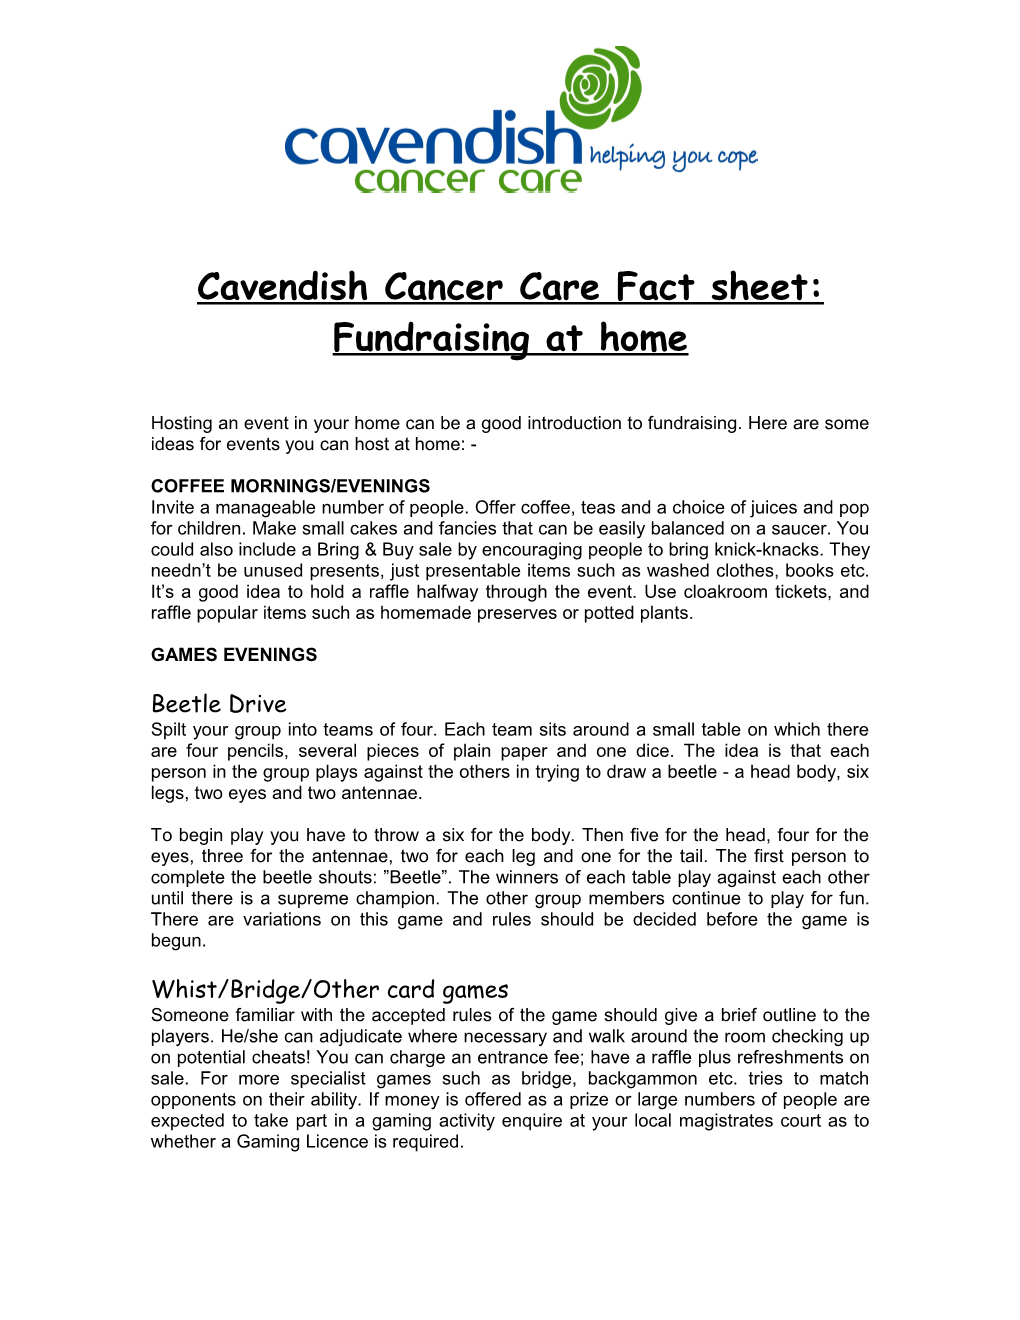 Cavendish Cancer Care Fact Sheet Fundraising at Home